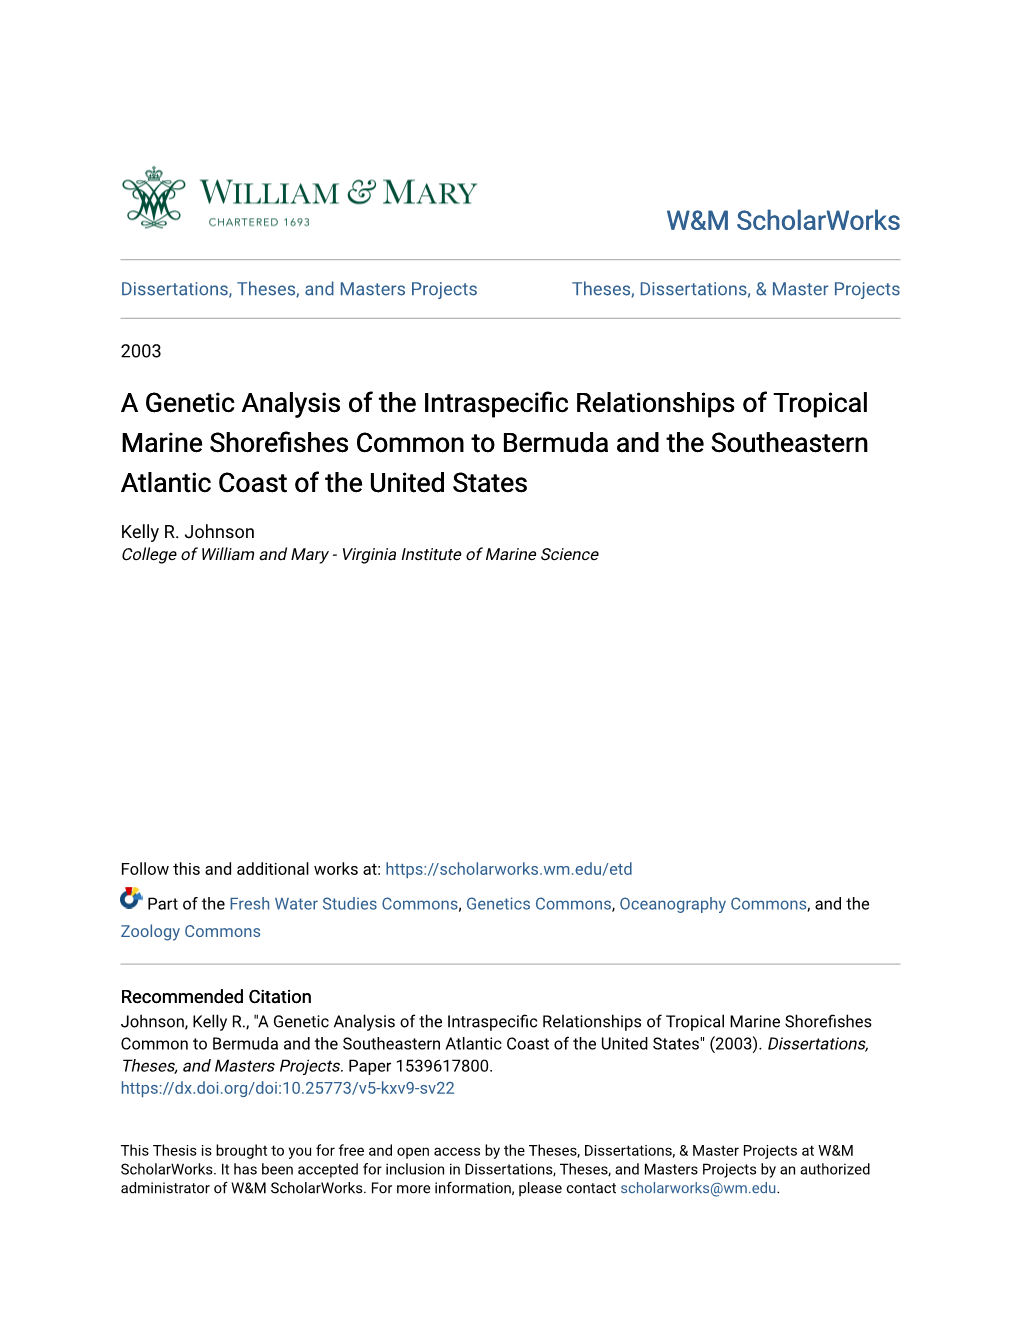 A Genetic Analysis of the Intraspecific Relationships of Tropical Marine Shorefishes Common to Bermuda and the Southeastern Atla